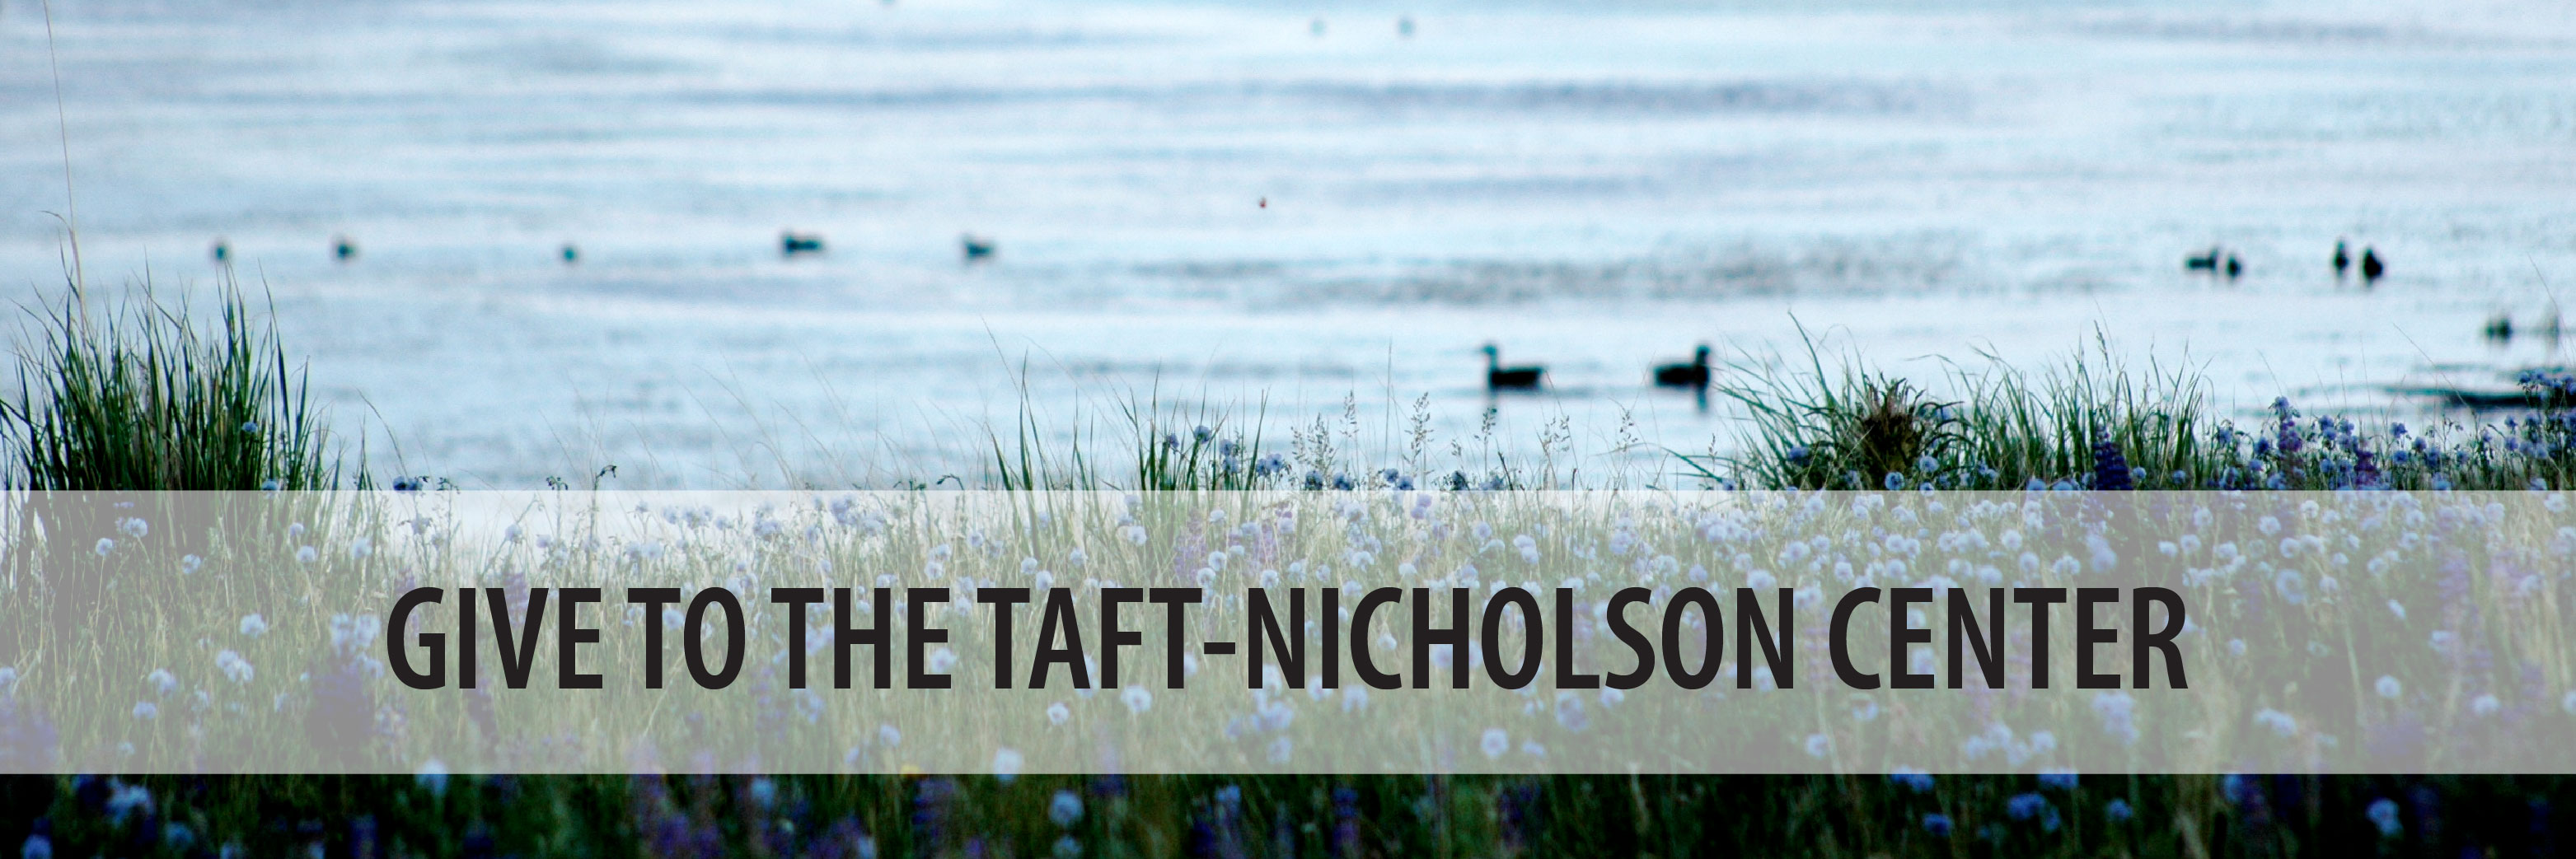 Give to the Taft-Nicholson Center